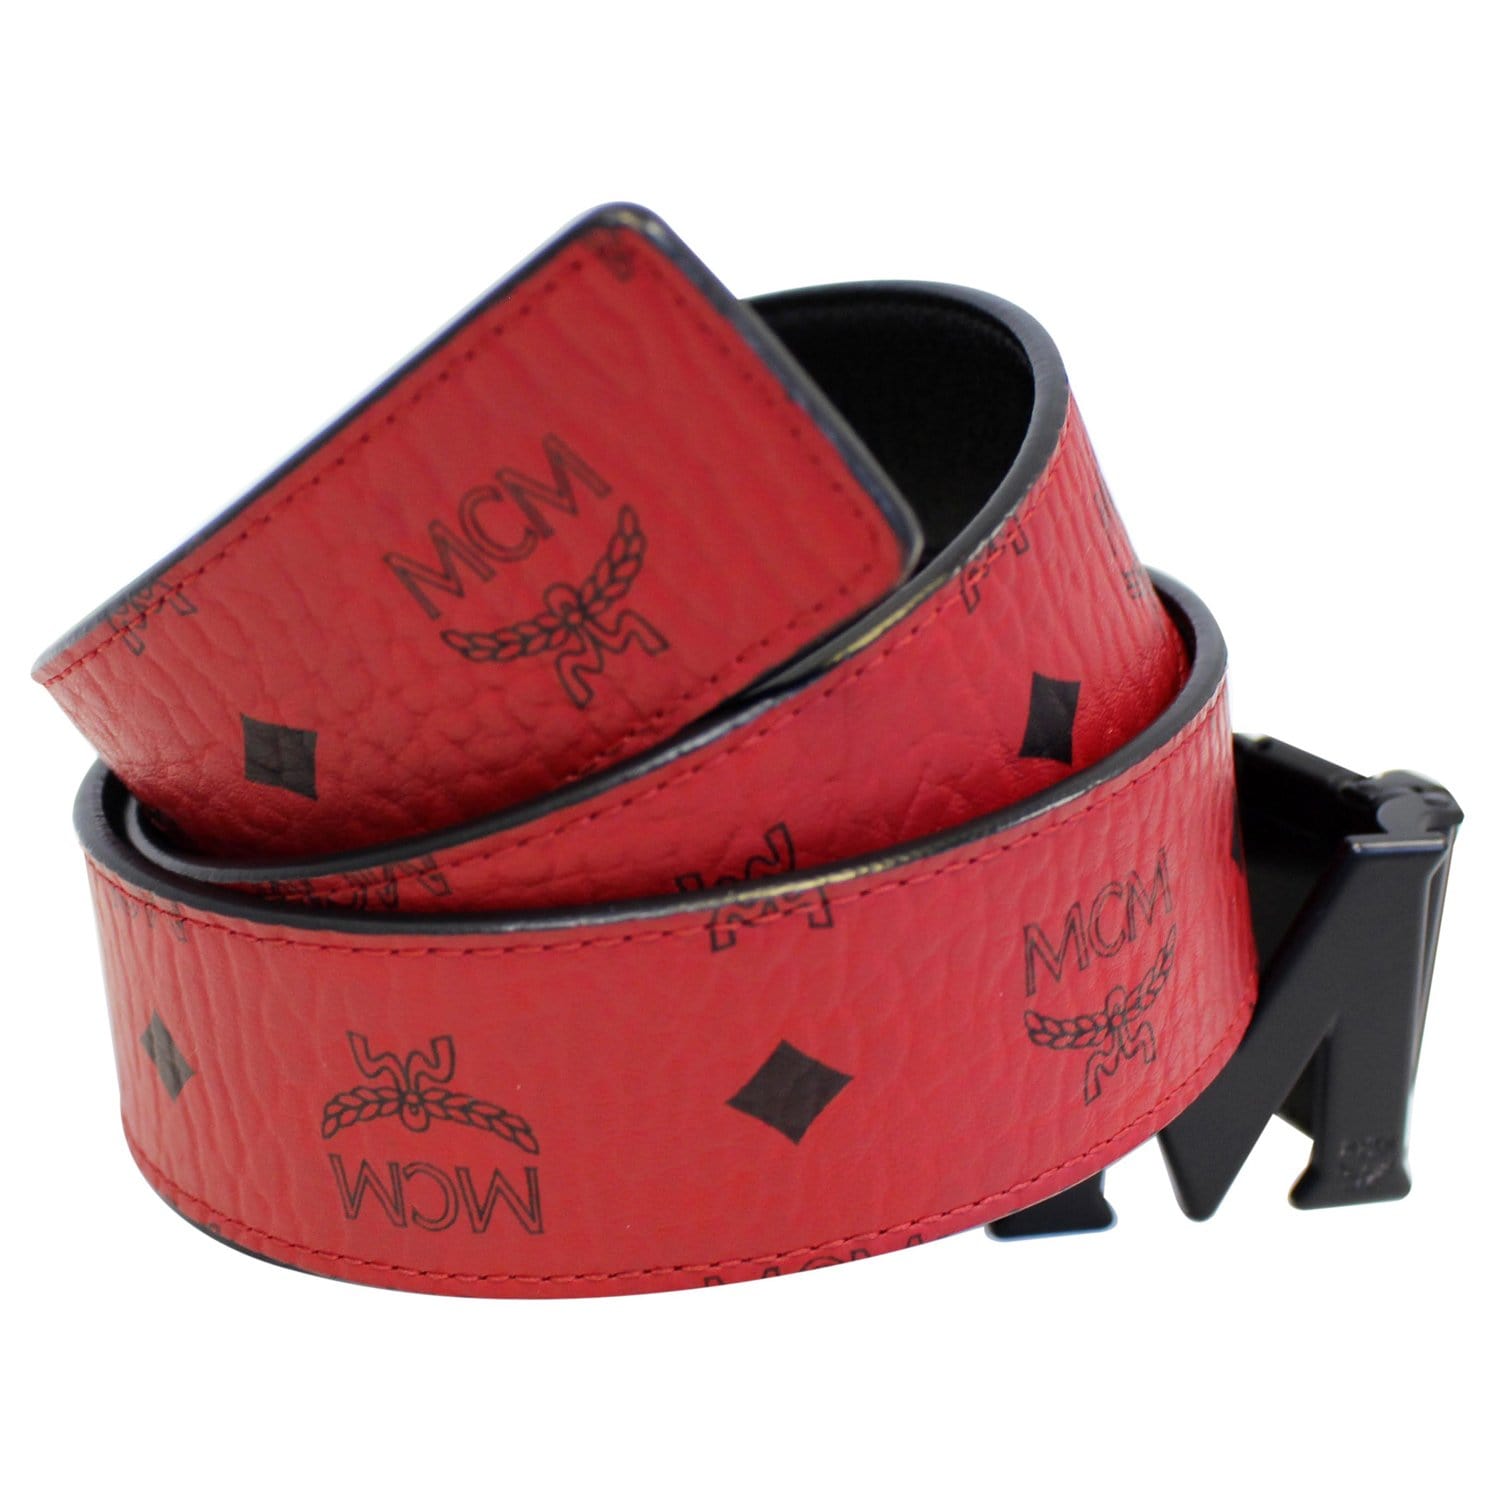 MCM Belt - Reversible - Red With Gold Buckle – Dabbous